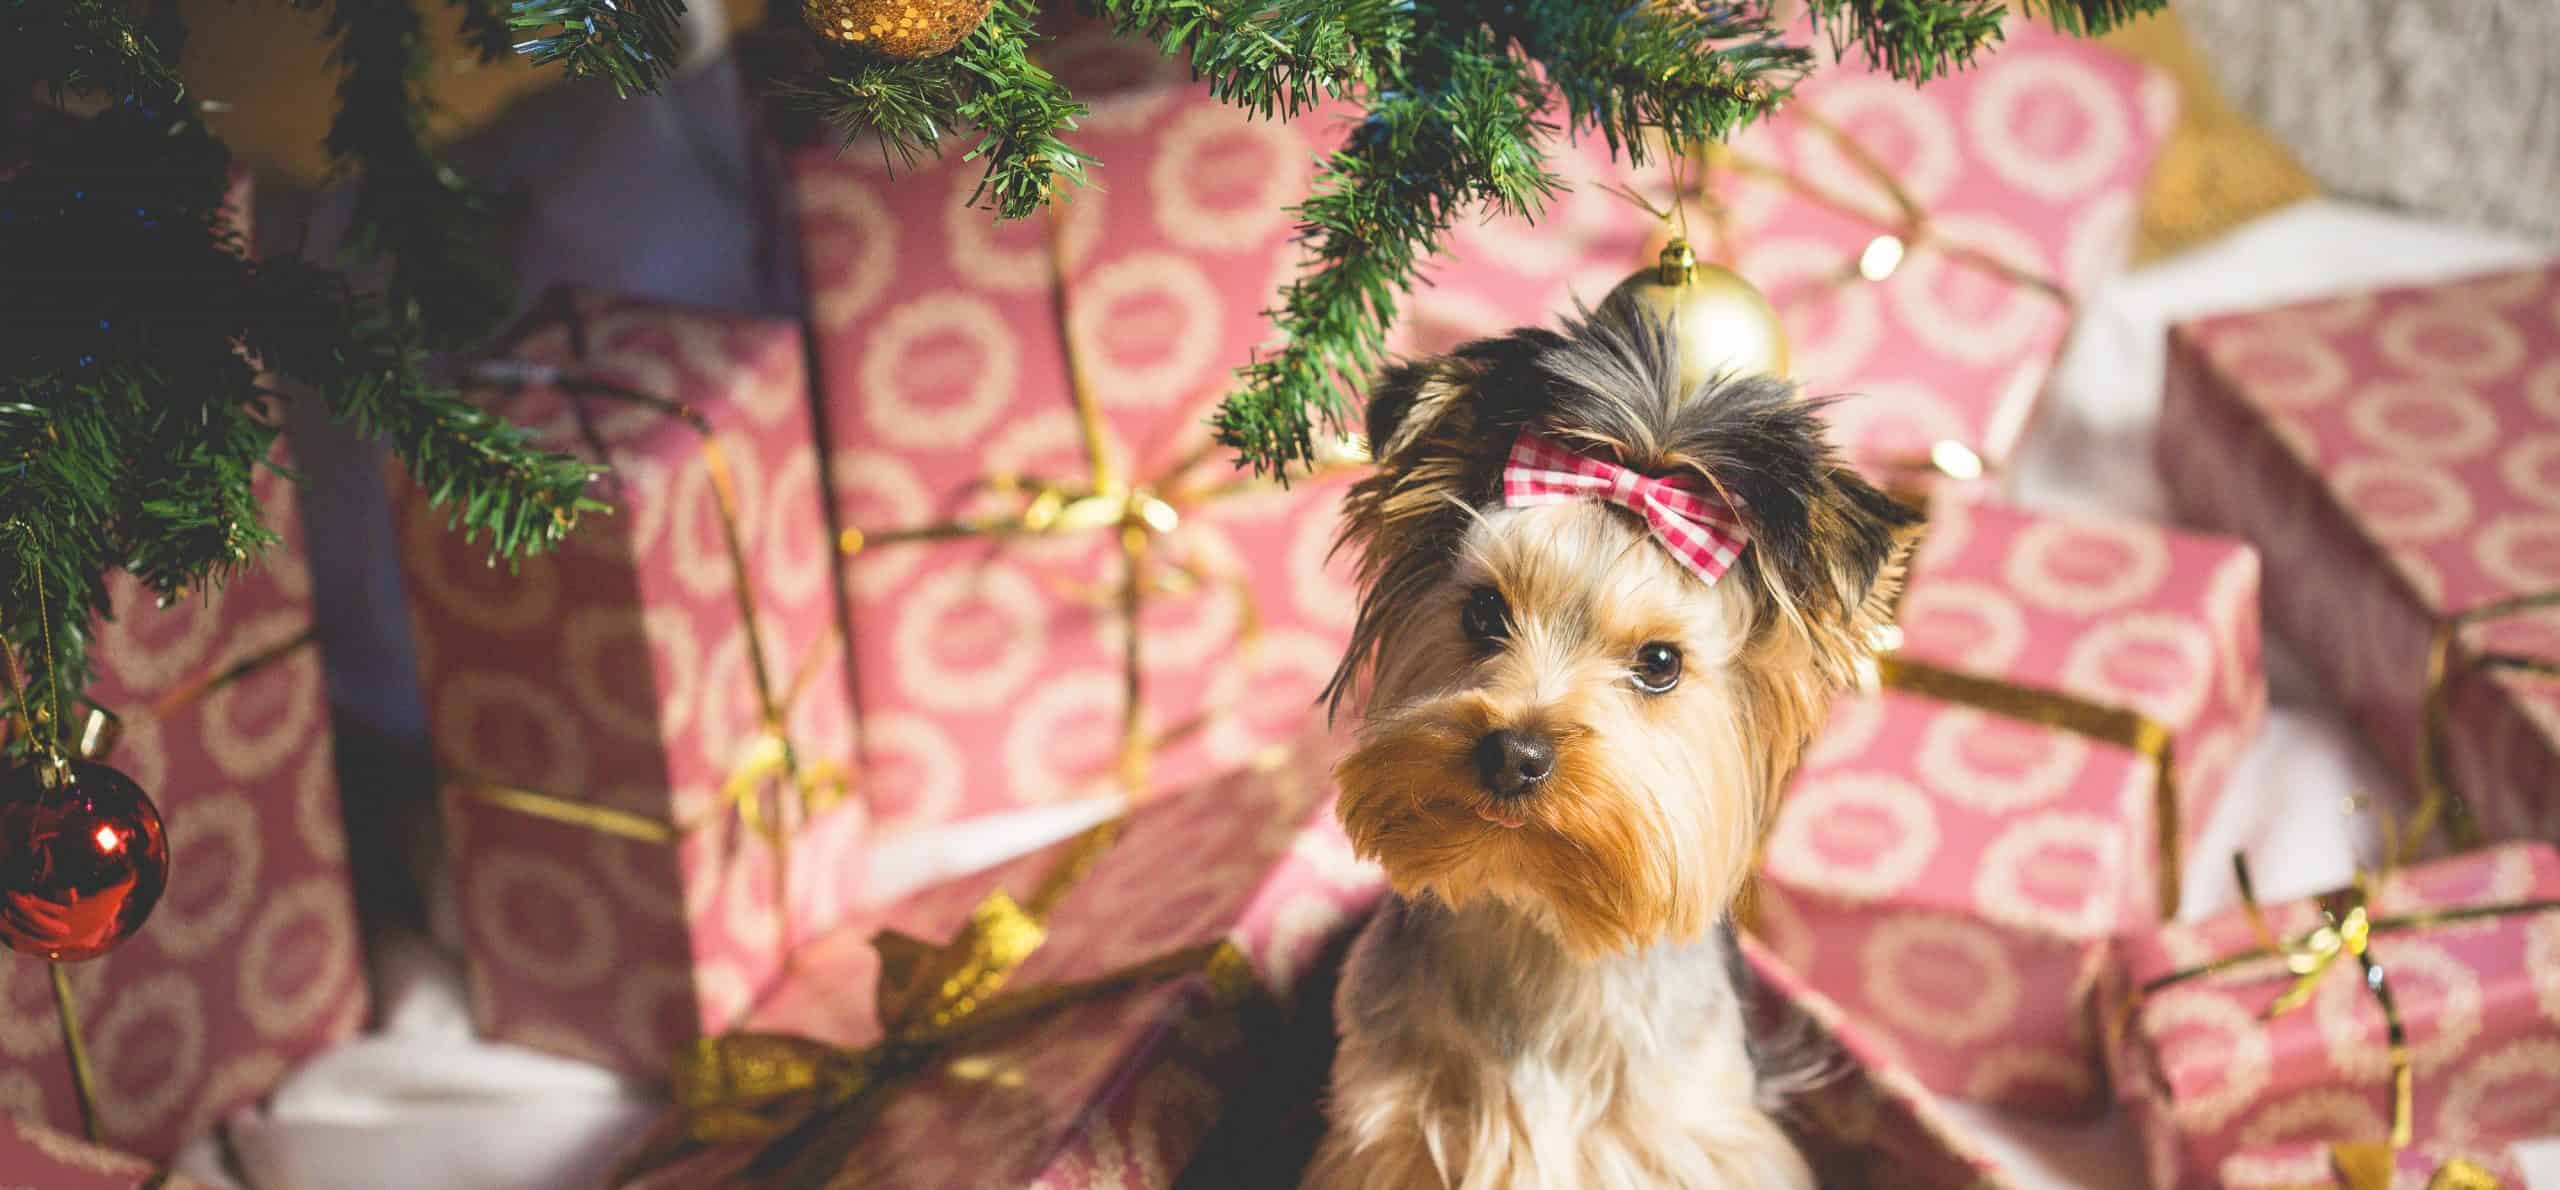 Dog surrounded by gifts under a christmas tree